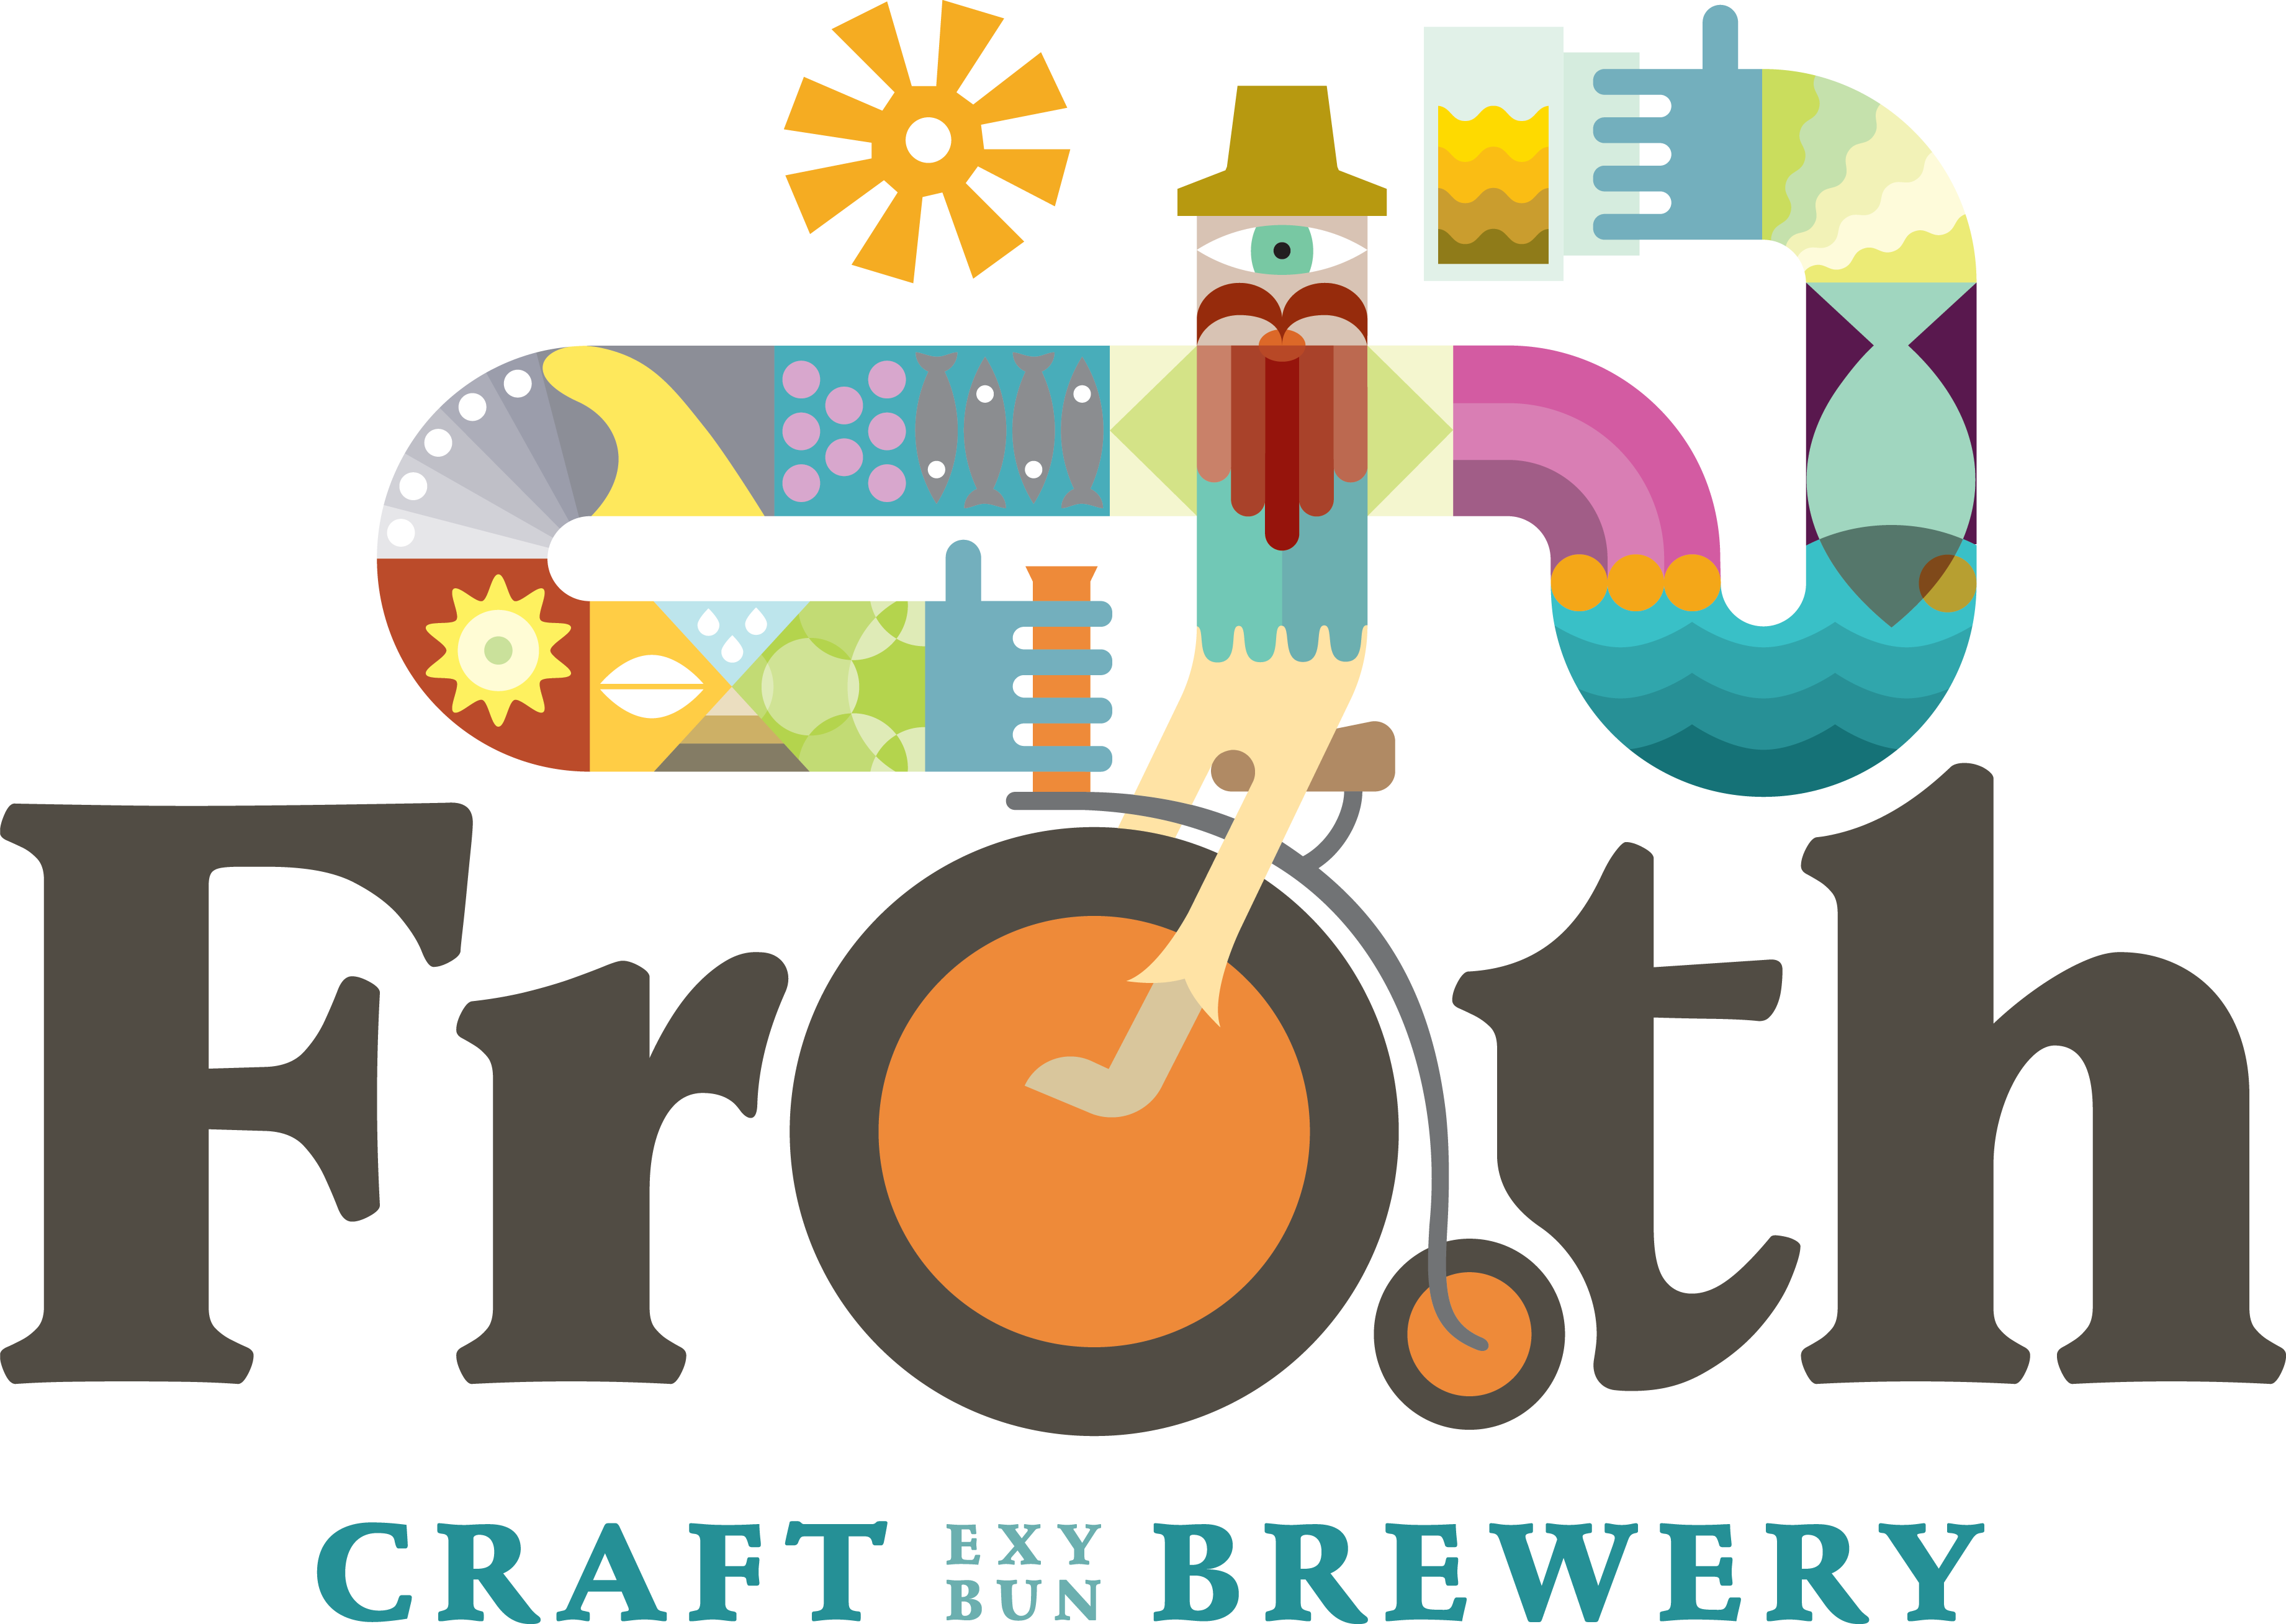 froth_logo